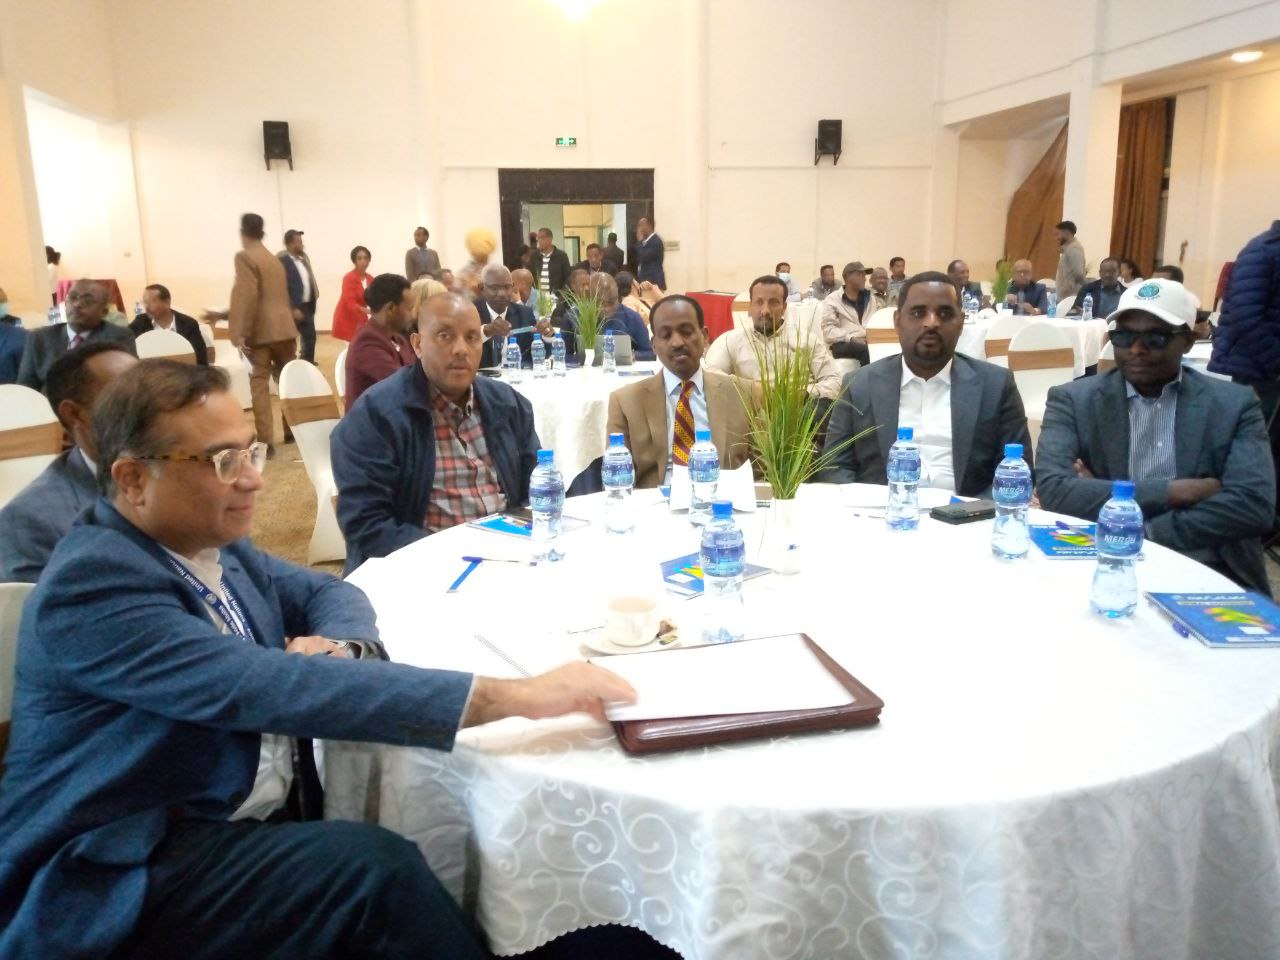 News: Rehabilitation Commission, Tigray officials hold first meeting in Mekelle on disarmament, national rehabilitation of Tigrayan forces